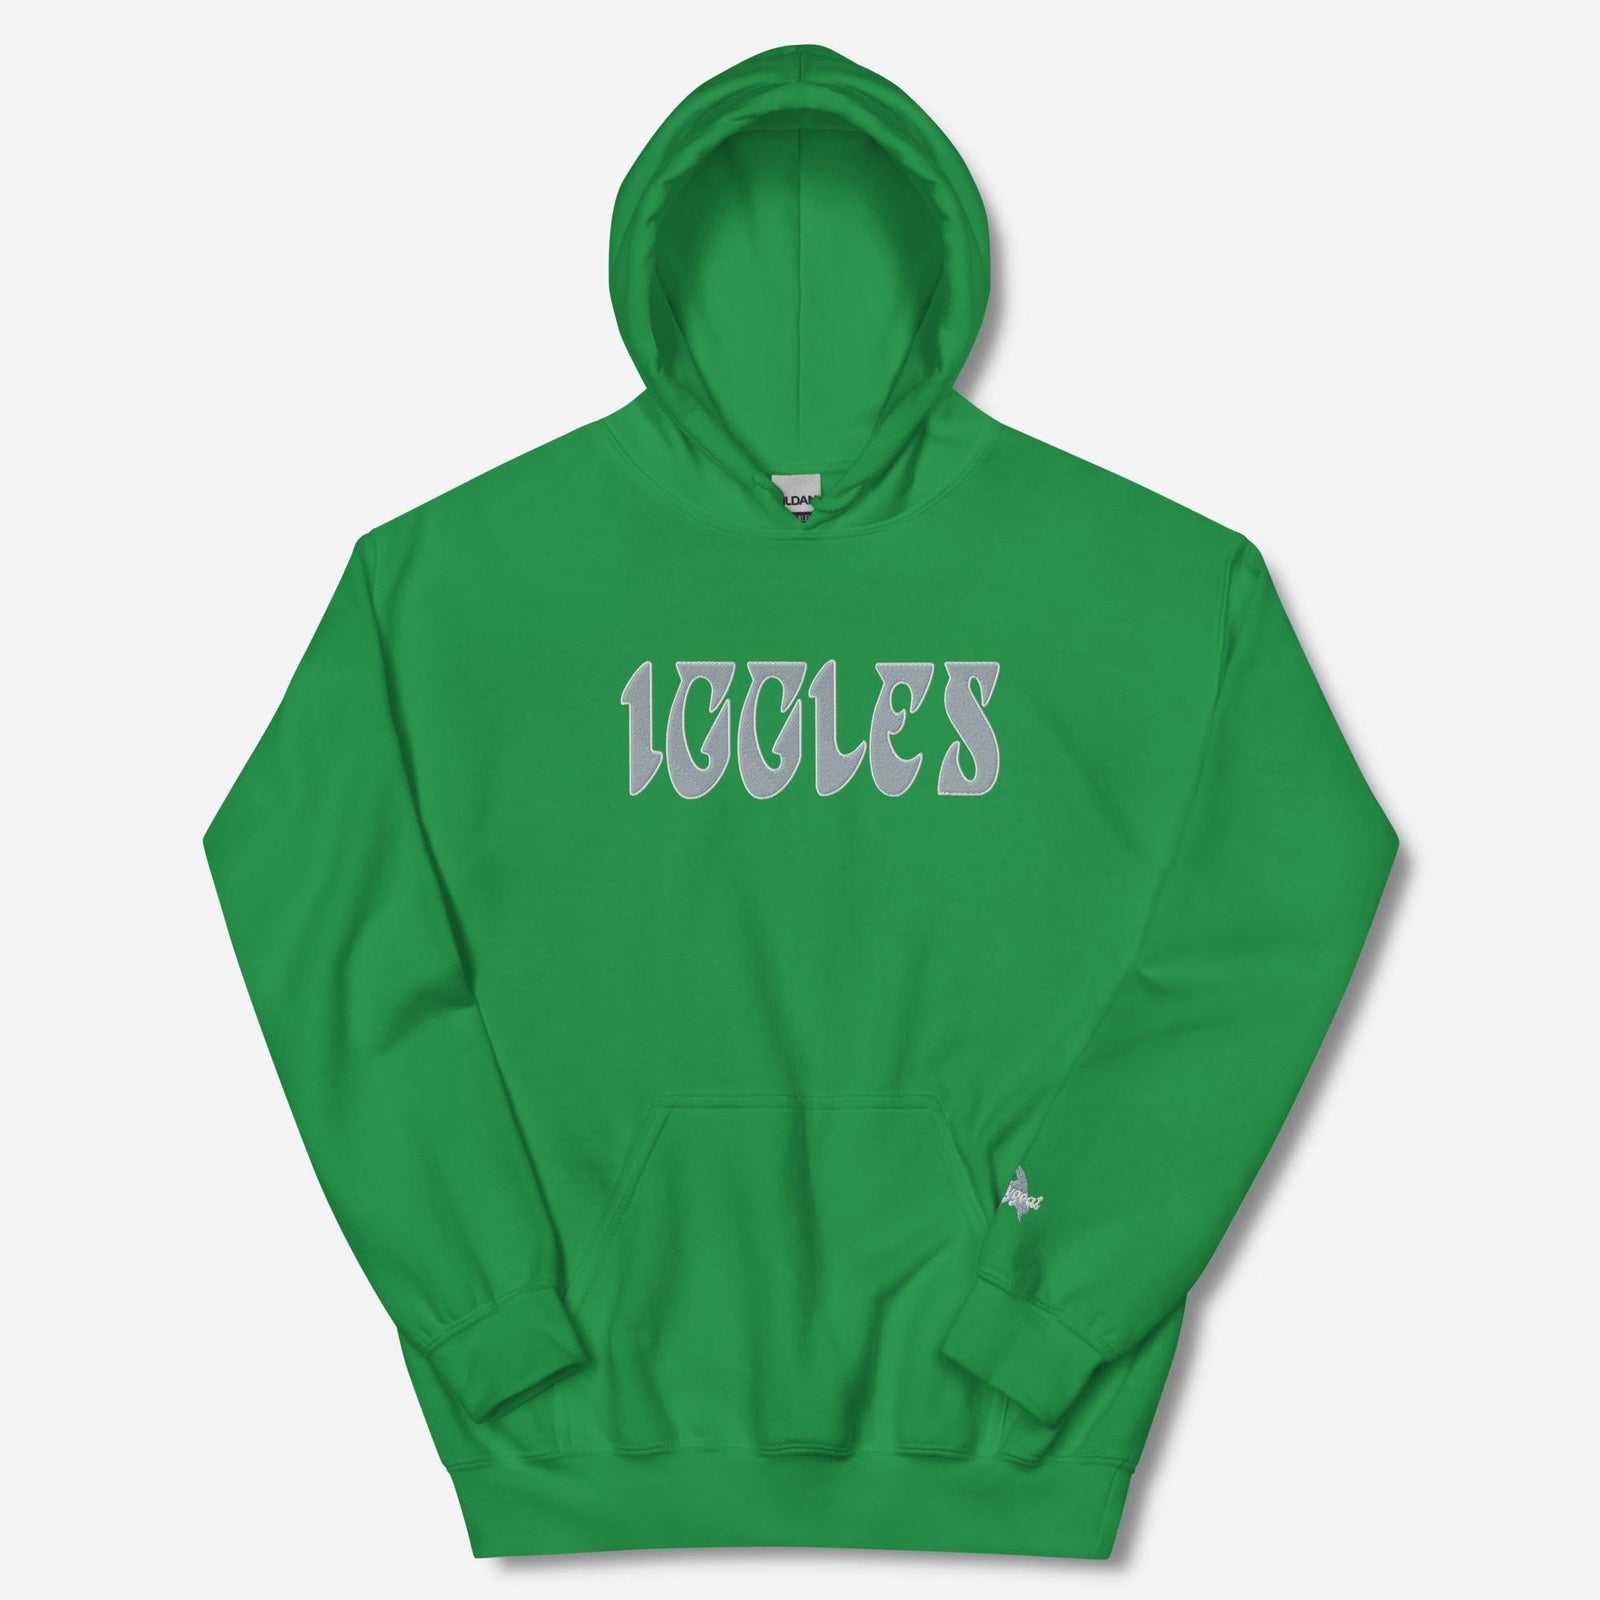 "Iggles" Embroidered Hoodie